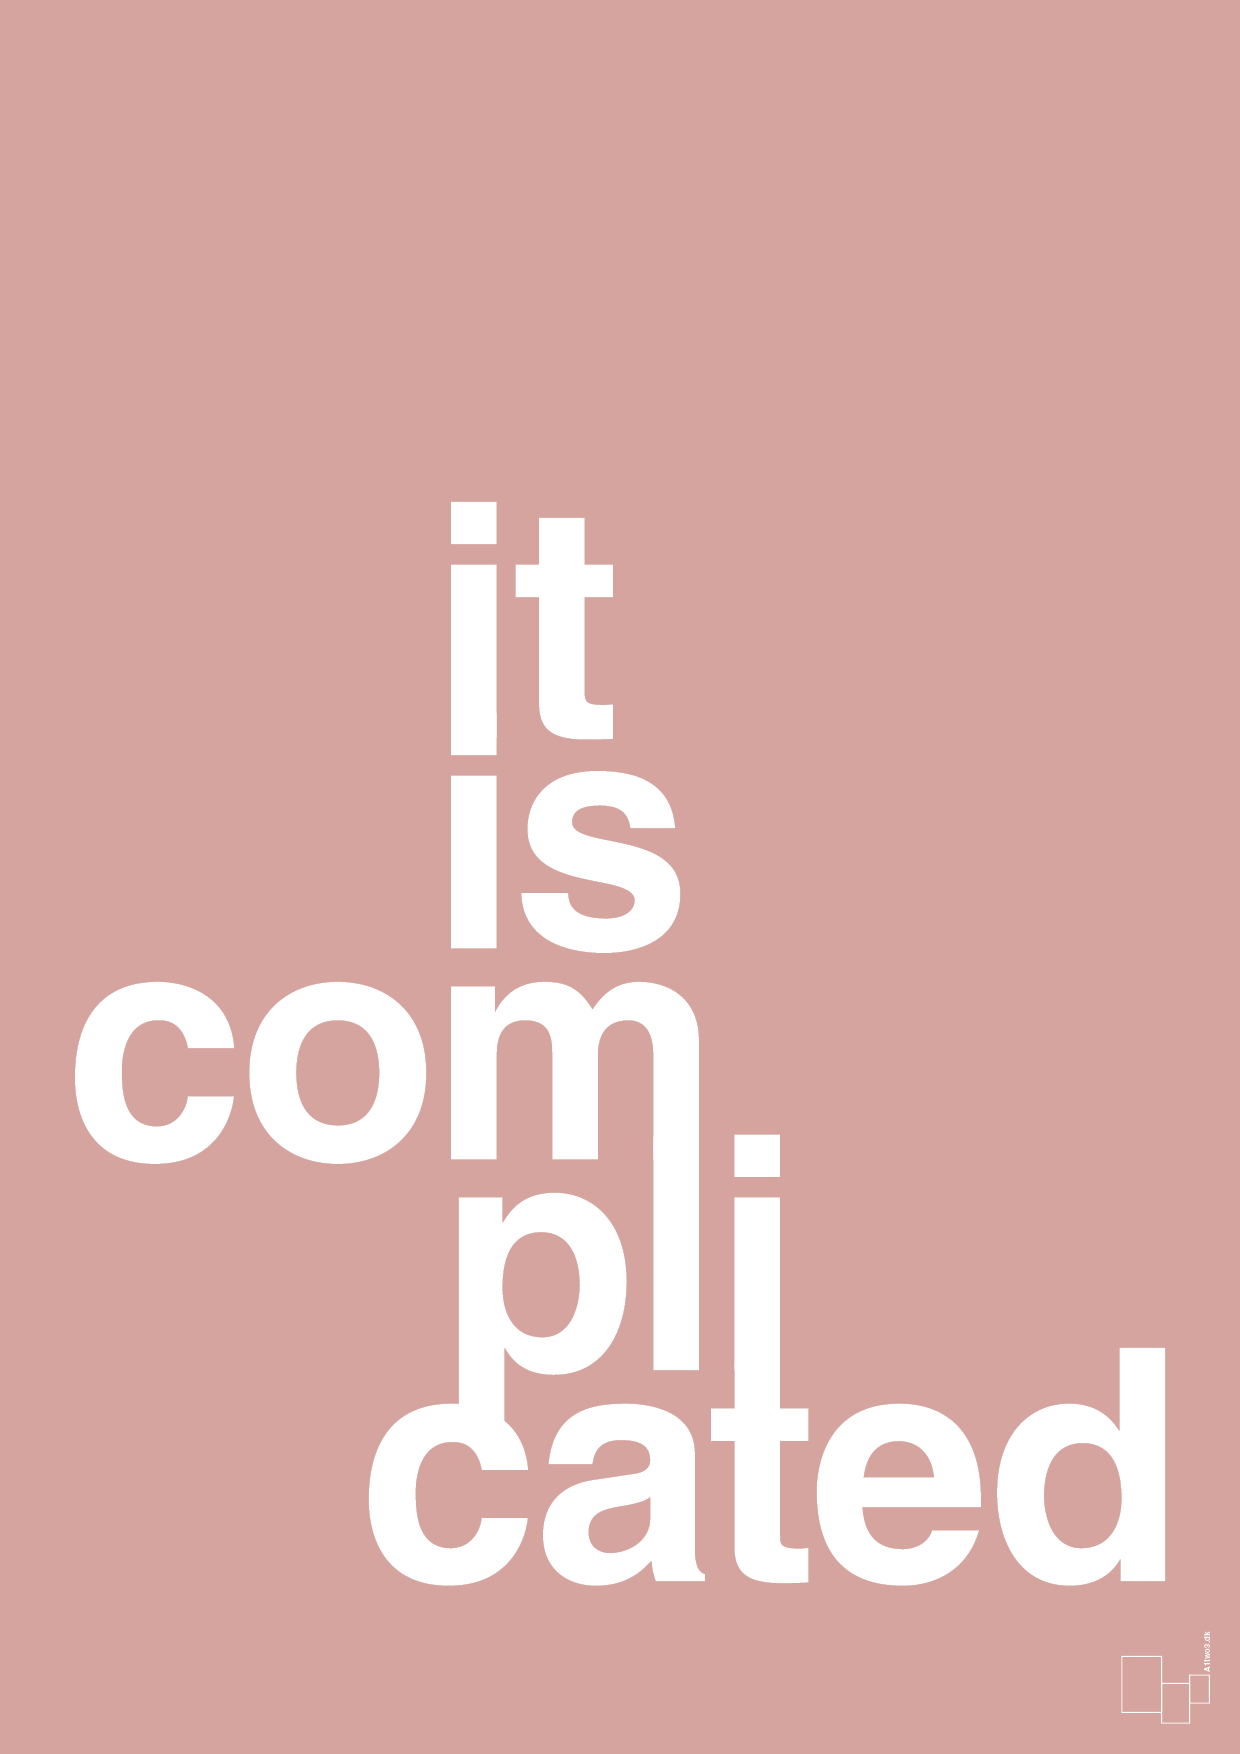 it is complicated - Plakat med Ordsprog i Bubble Shell